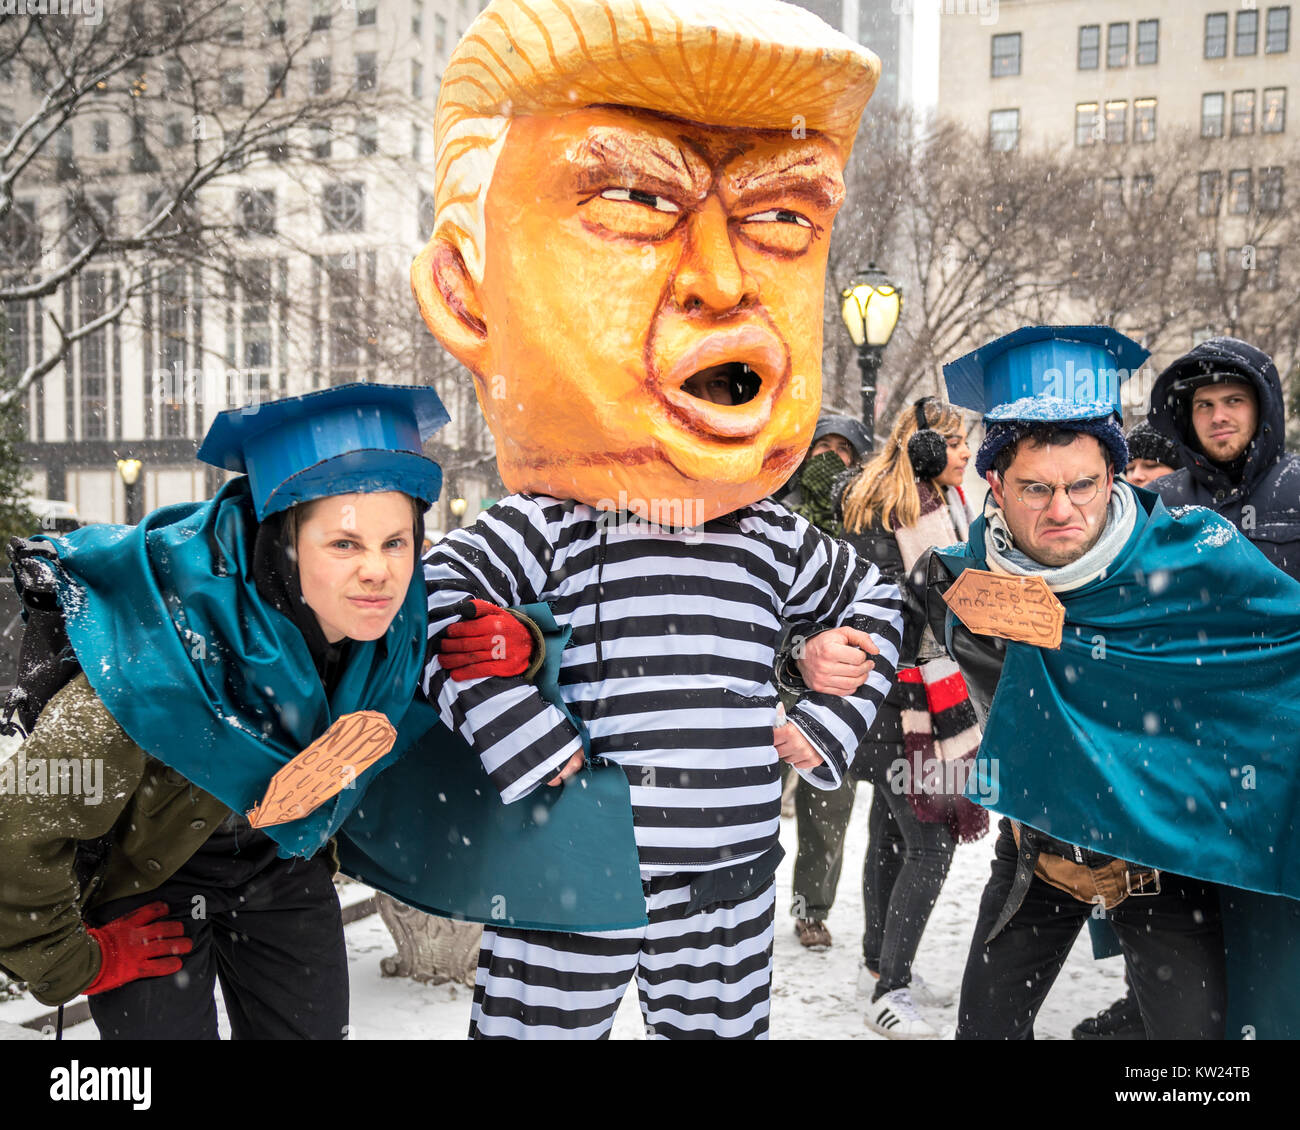 New York, USA, 30 Dec 2017.  Protesters representing New York policemen pretend to detain another demonstrator wearing a mask mocking a chained US President Donald Trump on a jail uniform, as they perform next to New York city's Plaza Hotel .  Demonstrators braved a snowstorm to demand Trump's impeachment. Photo by Enrique Shore/Alamy Live News Stock Photo